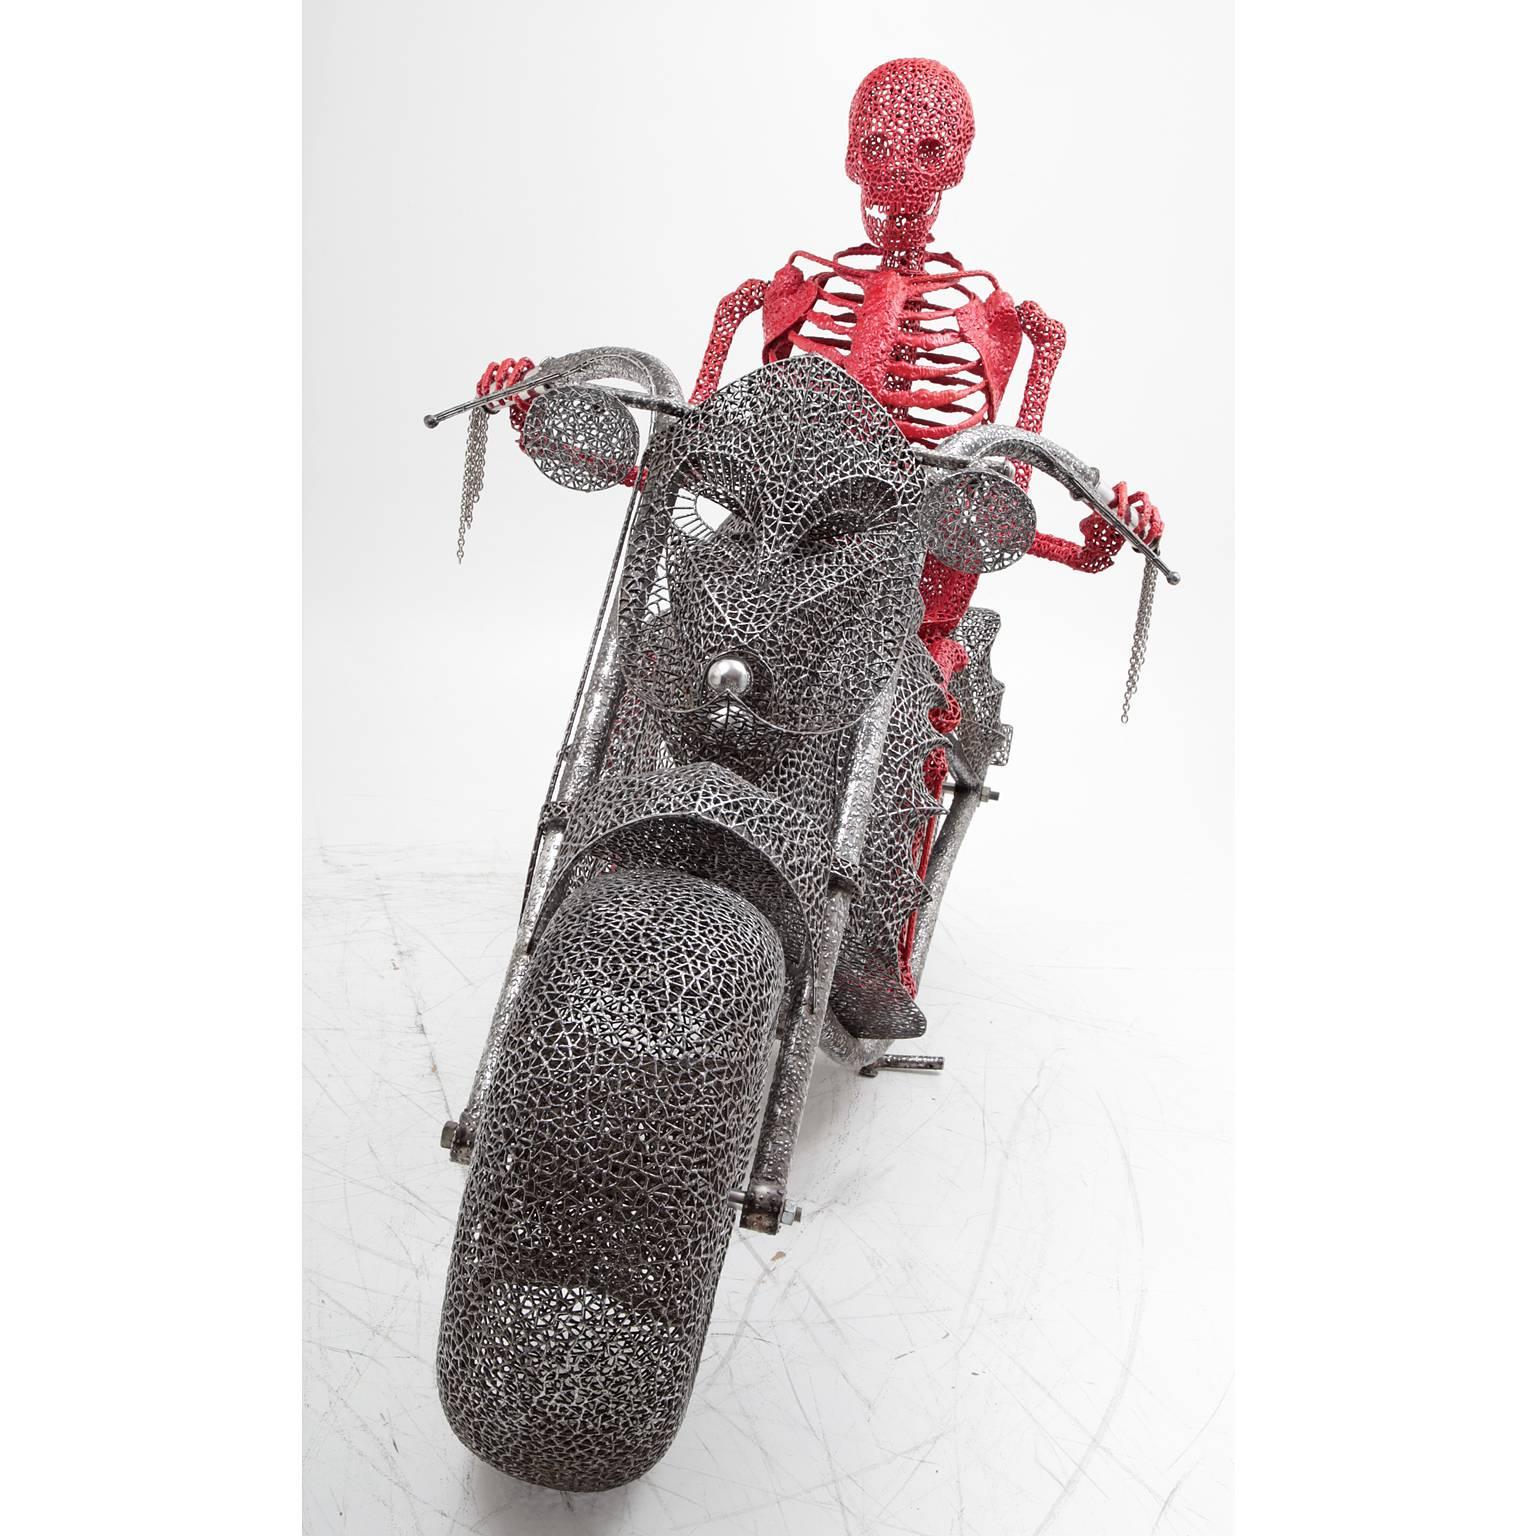 Lifesize sculpture of a motorcycle made out of individually welded rods, ridden by a red-coloured skeleton. The skeleton is not attached to the chopper and can be seperated from it.
Designer Anacleto Spazzapan considers himself to be in the service